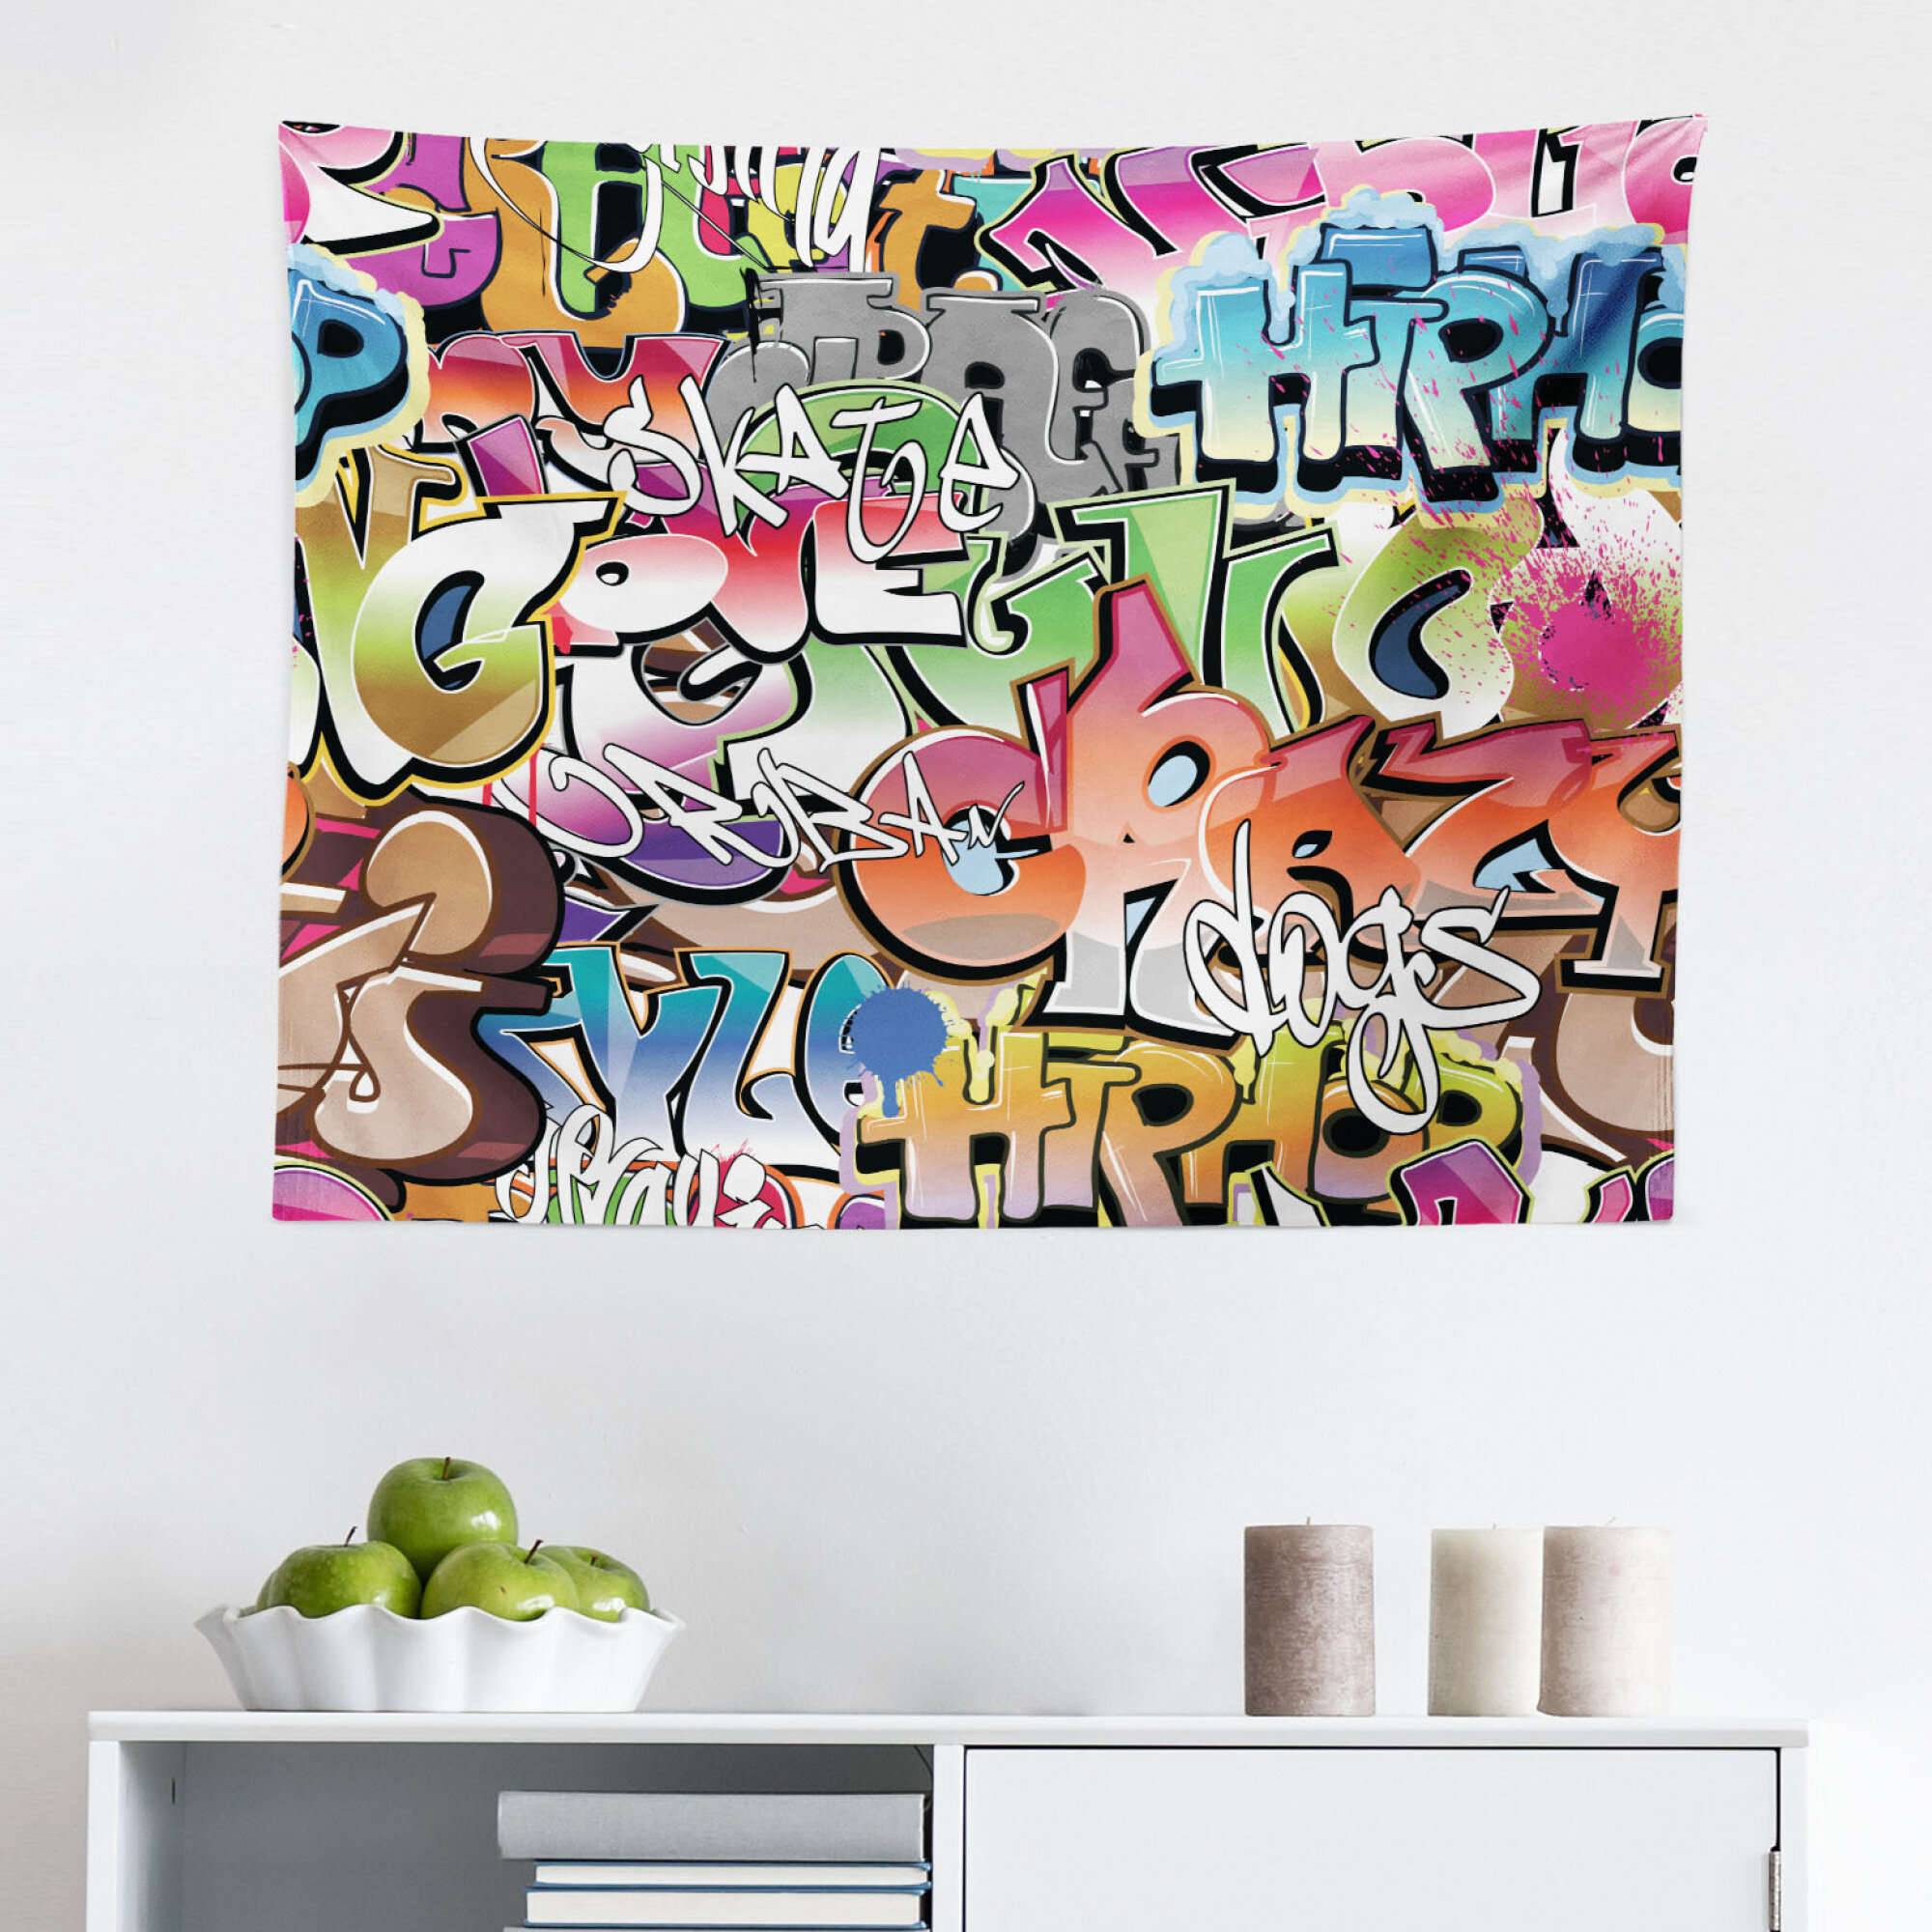  Ambesonne Graphic Tapestry, Hip Hop Street Culture Harlem New  York City Wall Graffiti Art Spray Art Image, Wide Wall Hanging for Bedroom  Living Room Dorm, 80 X 60, Pink Blue 